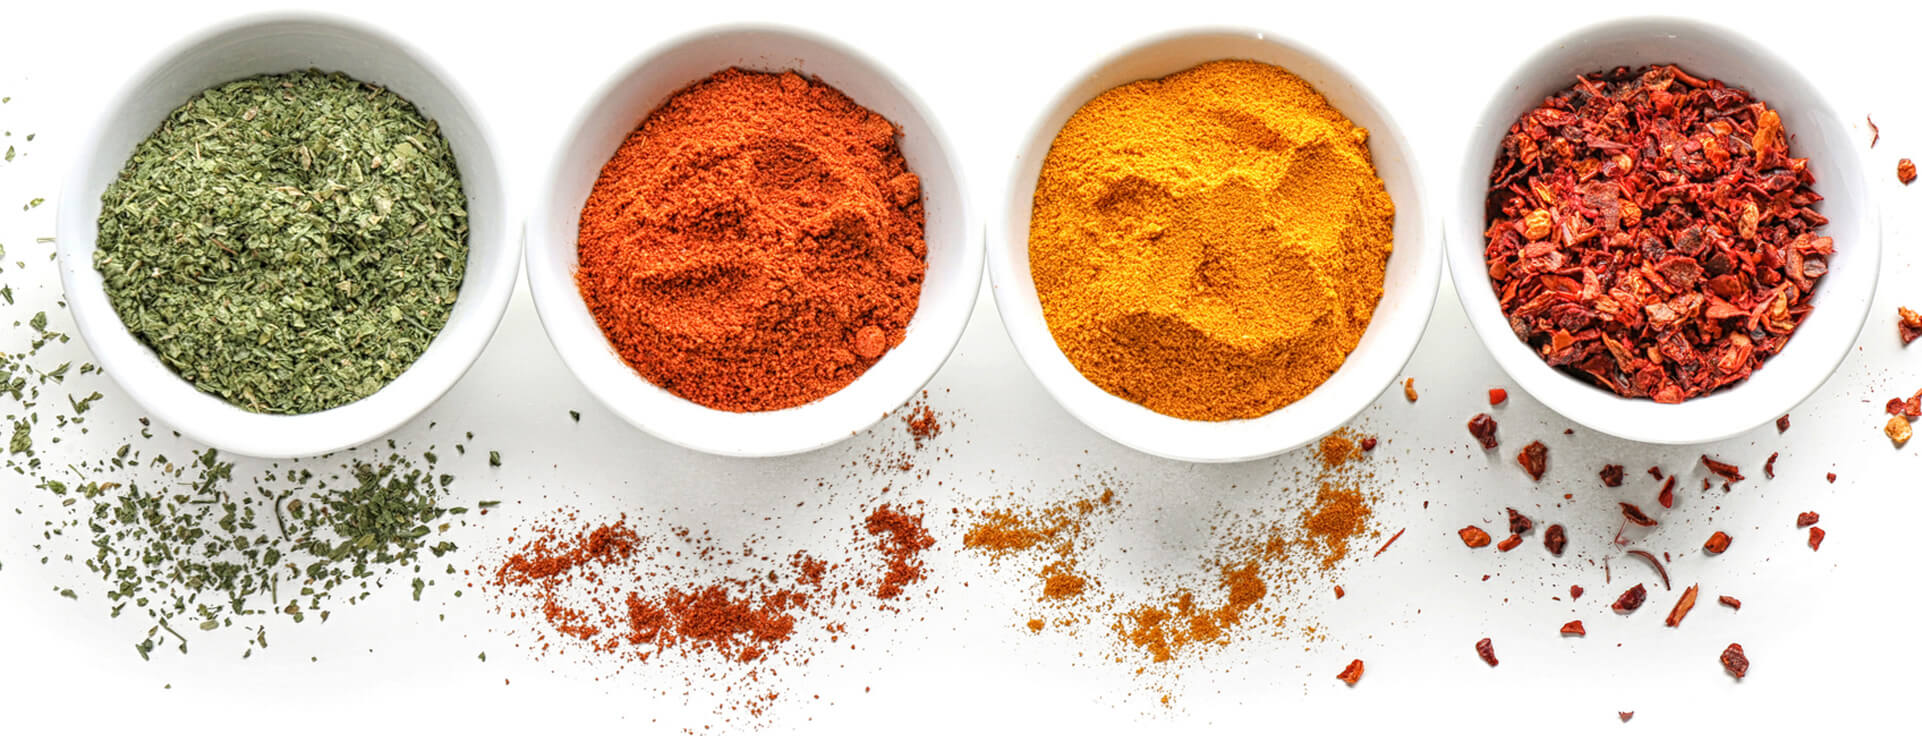 Microbial reduction for food ingredients, Pathogen reduction for food ingredients, Microbial reduction for spices, Pathogen reduction for spices